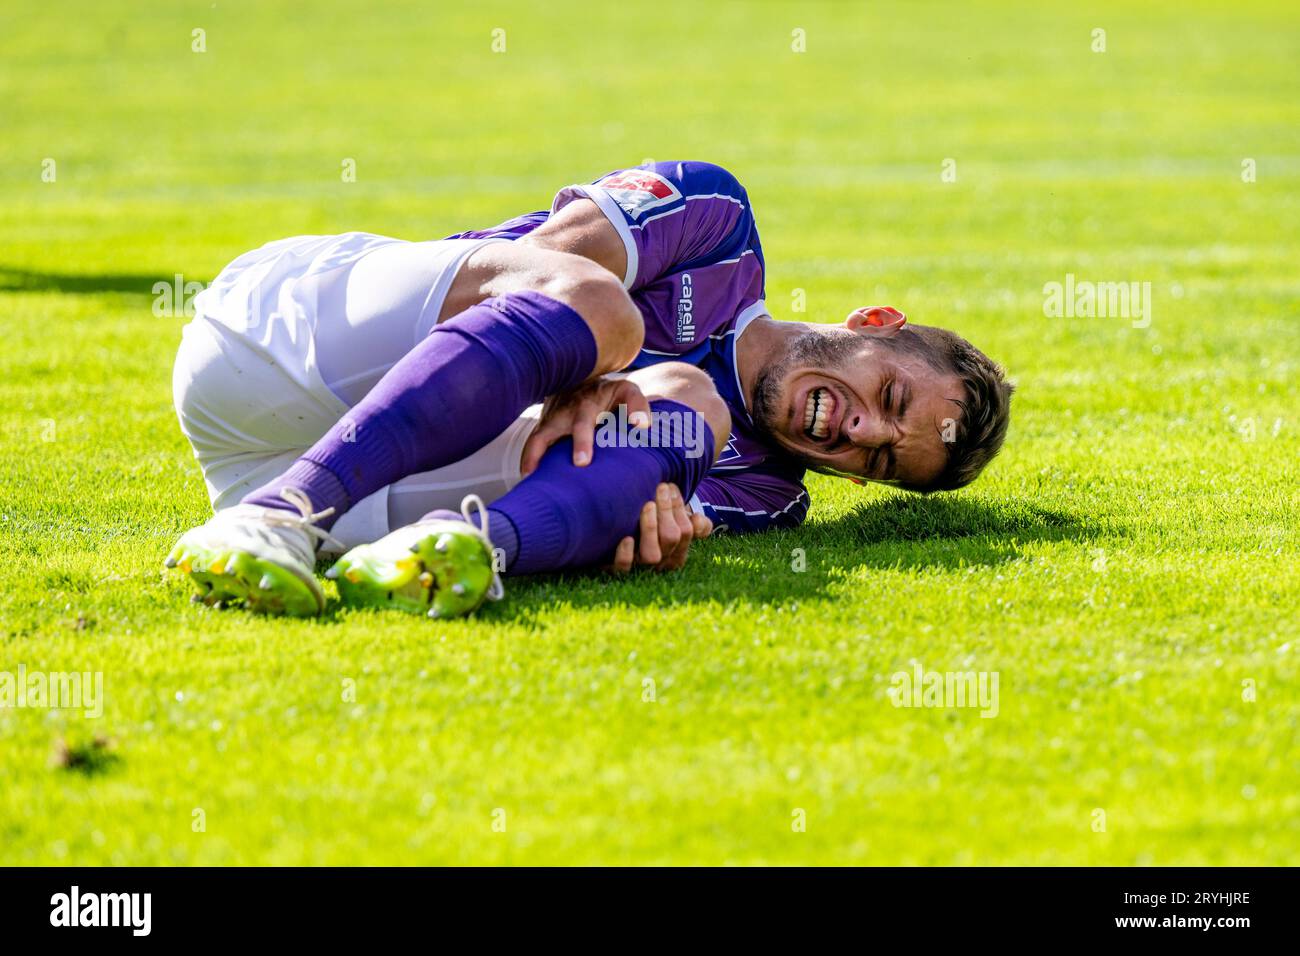 01 October 2023, Lower Saxony, Osnabrück: Soccer: 2. Bundesliga, VfL Osnabrück - 1. FC Kaiserslautern, Matchday 8, Stadion an der Bremer Brücke. Osnabrück's Bashkim Ajdini lies on the ground in pain. Photo: David Inderlied/dpa - IMPORTANT NOTE: In accordance with the requirements of the DFL Deutsche Fußball Liga and the DFB Deutscher Fußball-Bund, it is prohibited to use or have used photographs taken in the stadium and/or of the match in the form of sequence pictures and/or video-like photo series. Stock Photo